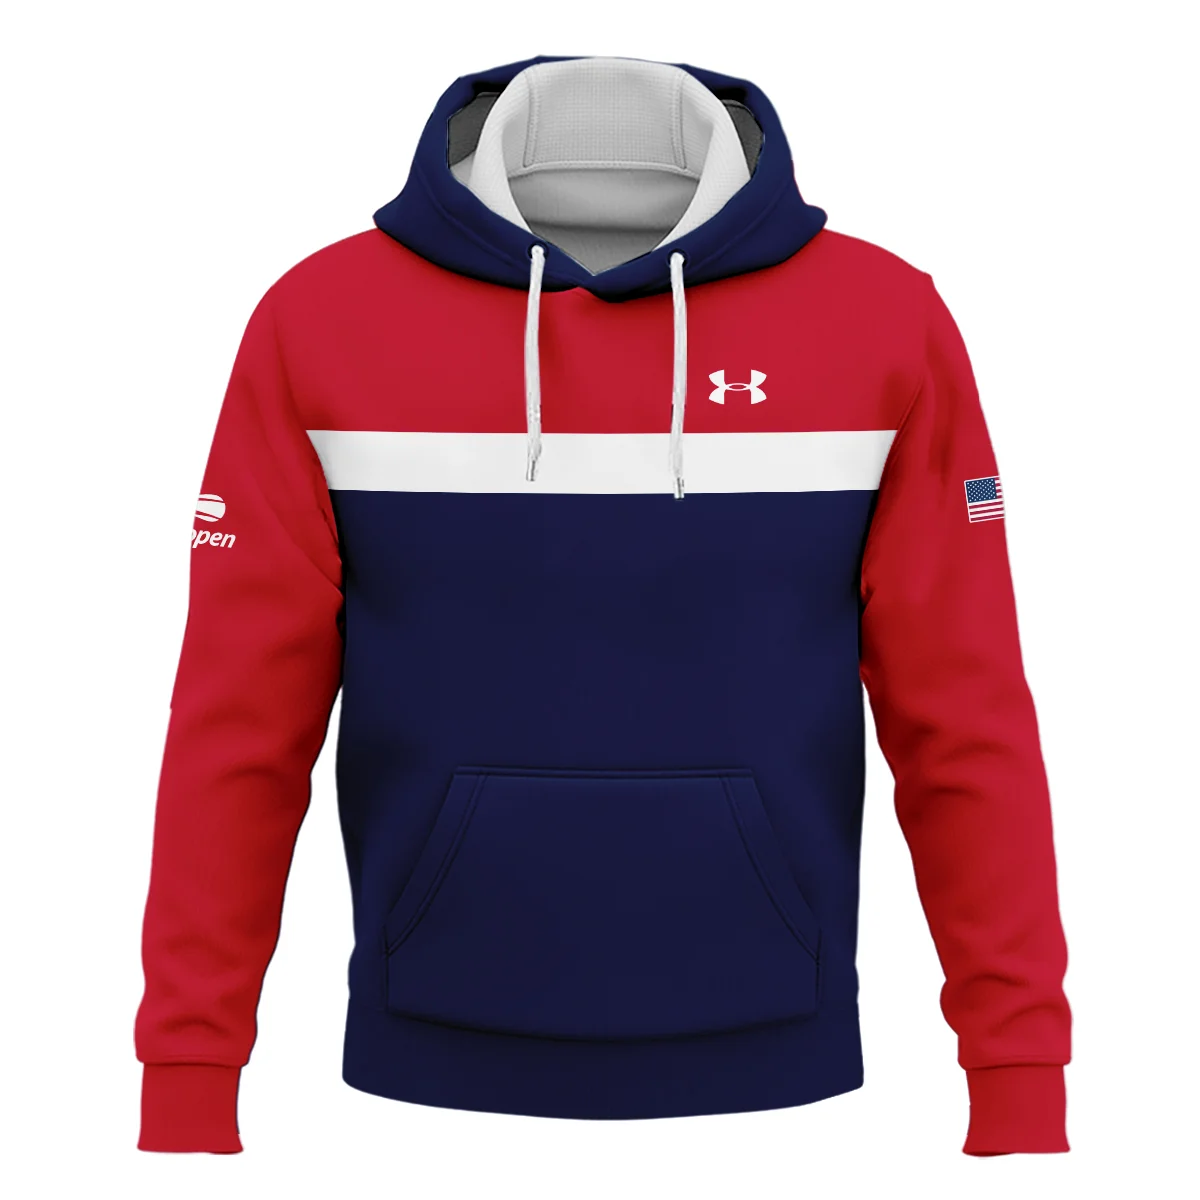 Under Armour Blue Red White Background US Open Tennis Champions Hoodie Shirt Style Classic Hoodie Shirt